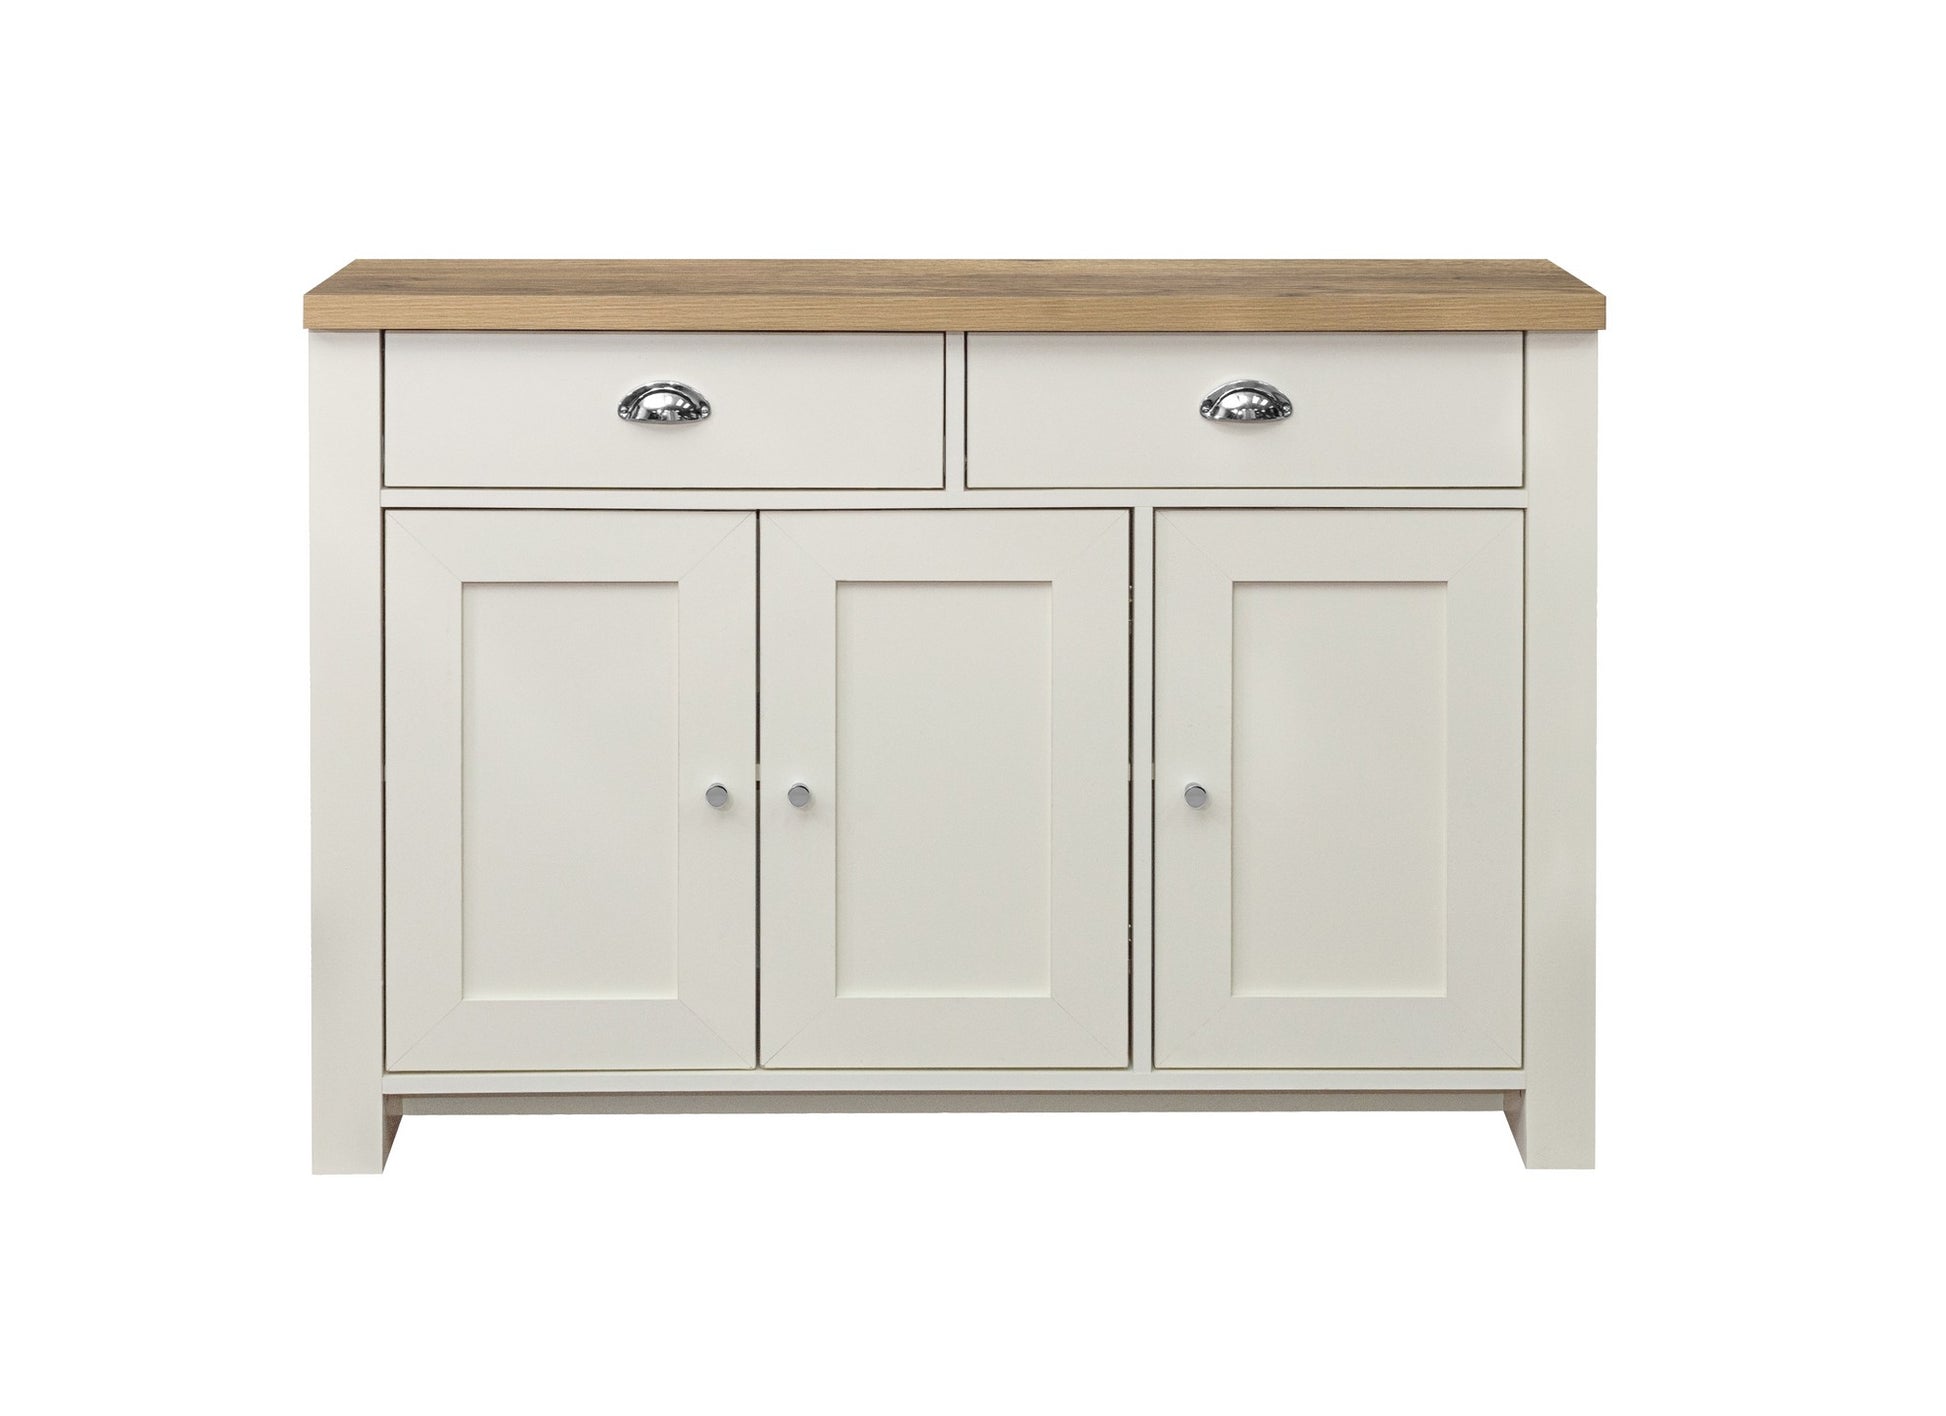 Highgate 3 Door 2 Drawer Sideboard - Classic Farmhouse Inspired, Modern Practical Affordable Furniture with Stylish Silver Handles, Ideal for Living or Dining Room Storage